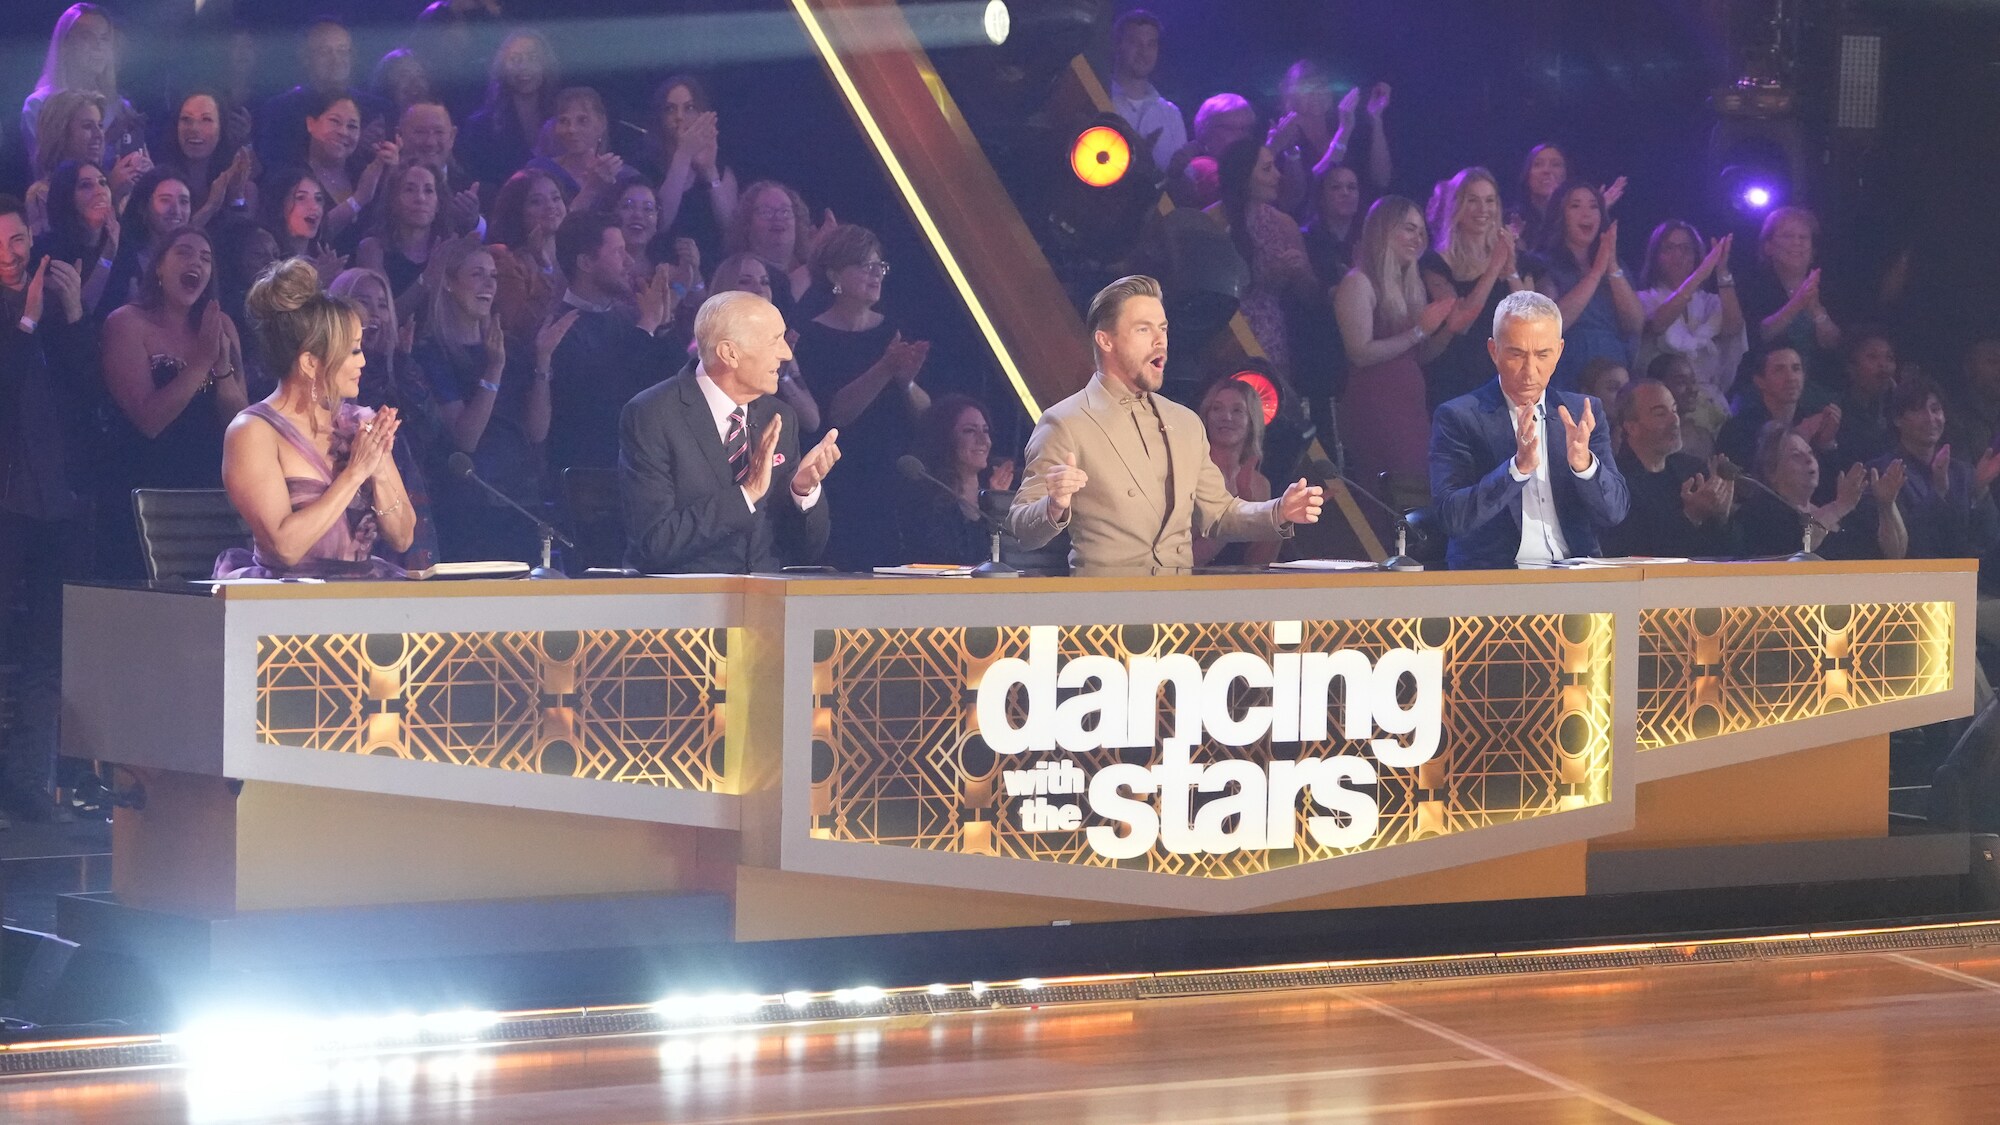 DANCING WITH THE STARS - “Stars' Stories Week: Most Memorable Year” – “Stars’ Stories Week” kicks off its exciting two-night event with “Most Memorable Year.” The 12 remaining couples will perform emotional routines that best represent the most impactful years of their lives. An all-new episode of “Dancing with the Stars” will stream live MONDAY, OCT. 17 (8:00pm ET / 5:00pm PT), on Disney+. (ABC/Eric McCandless) CARRIE ANN INABA, LEN GOODMAN, DEREK HOUGH, BRUNO TONIOLI